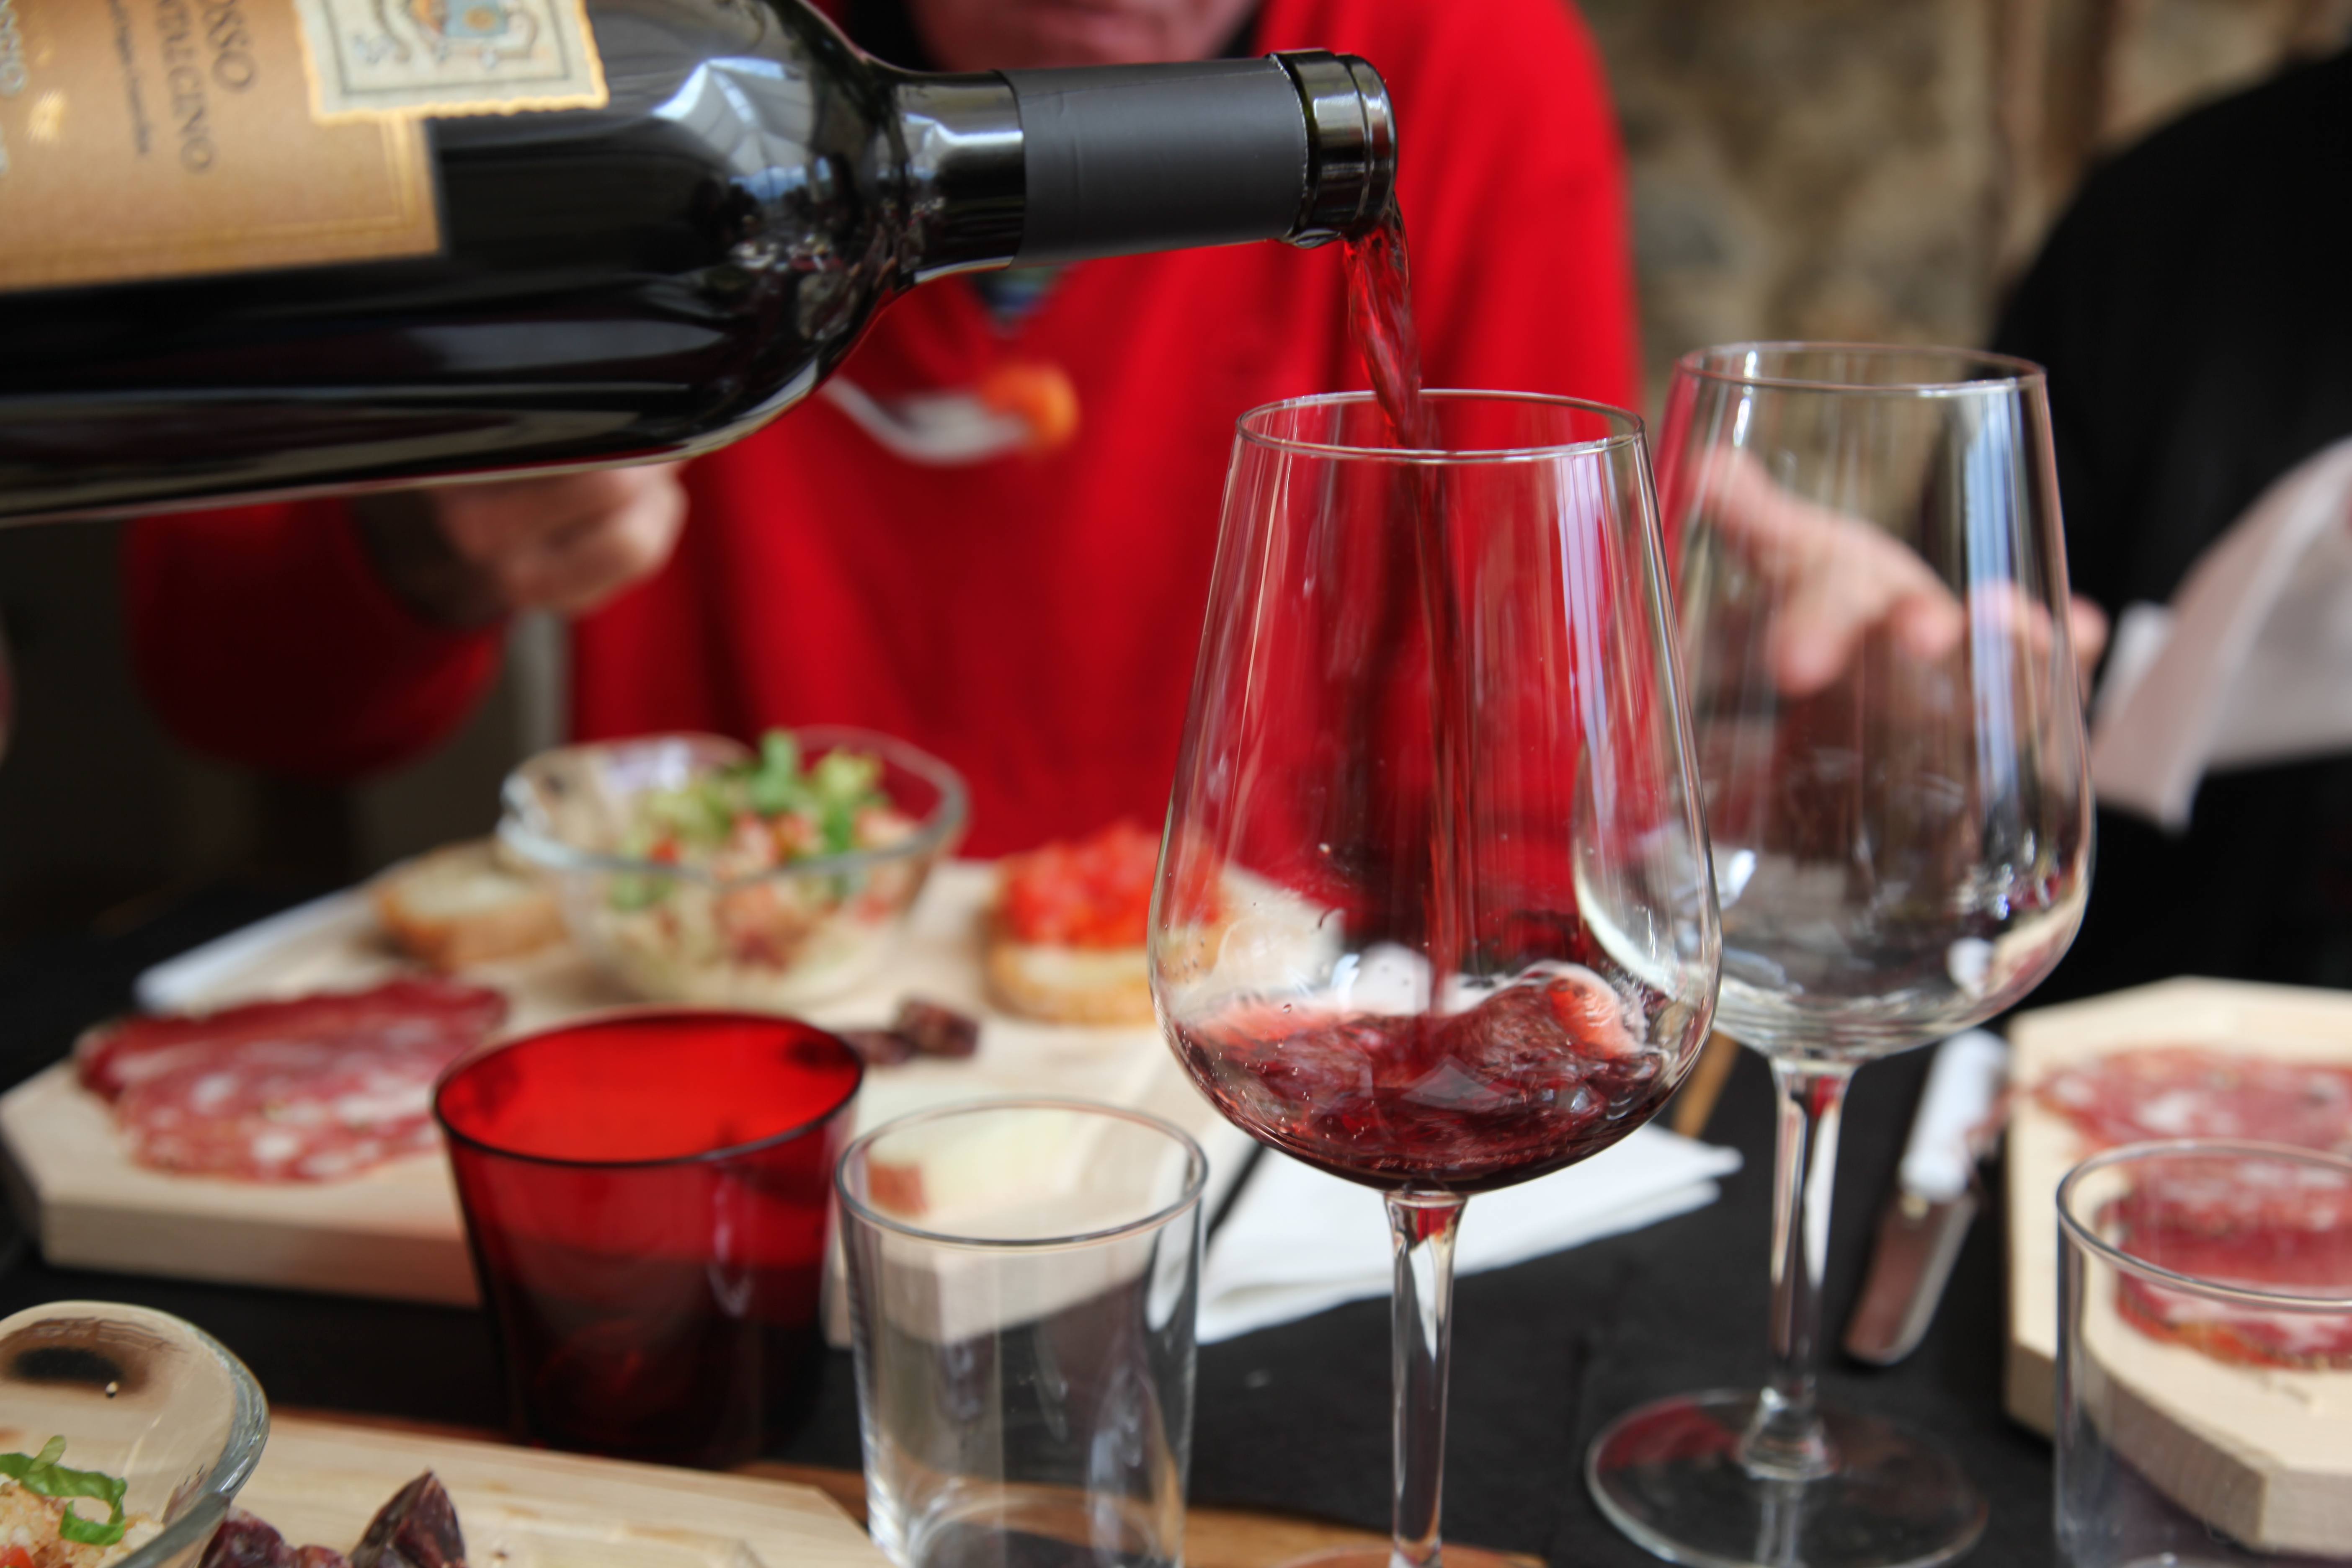 tuscany wine tasting tour from rome